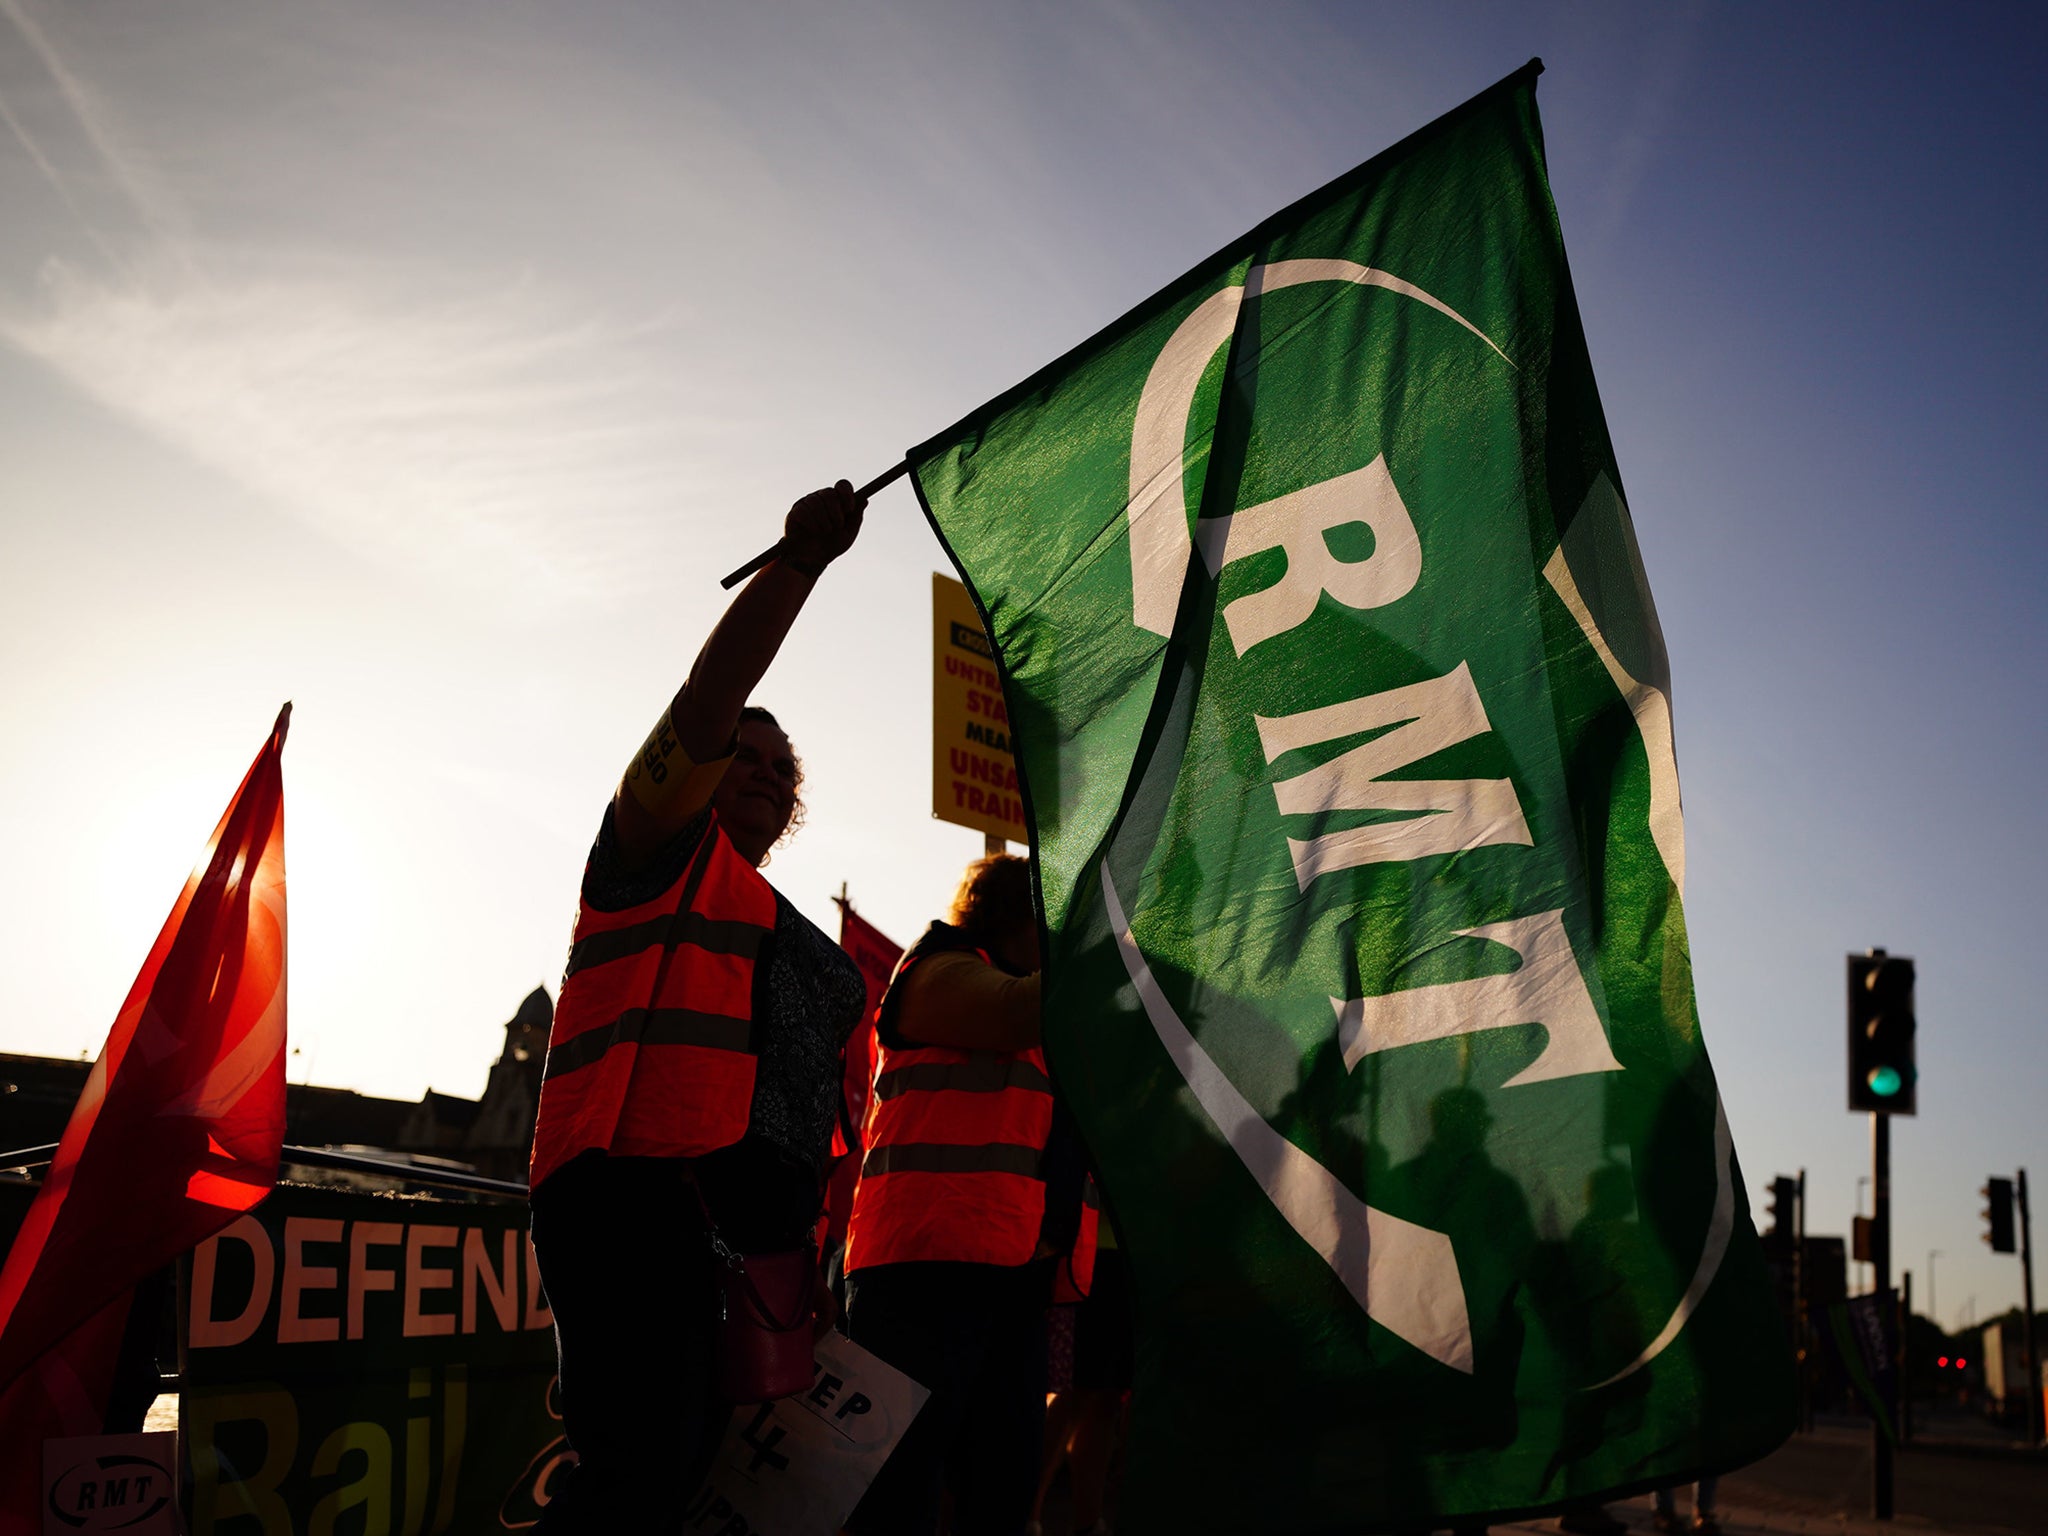 Members of the Rail, Maritime and Transport union (RMT) on the picket line outside Bristol Temple Meads station as union members take part in a strike over pay and conditions